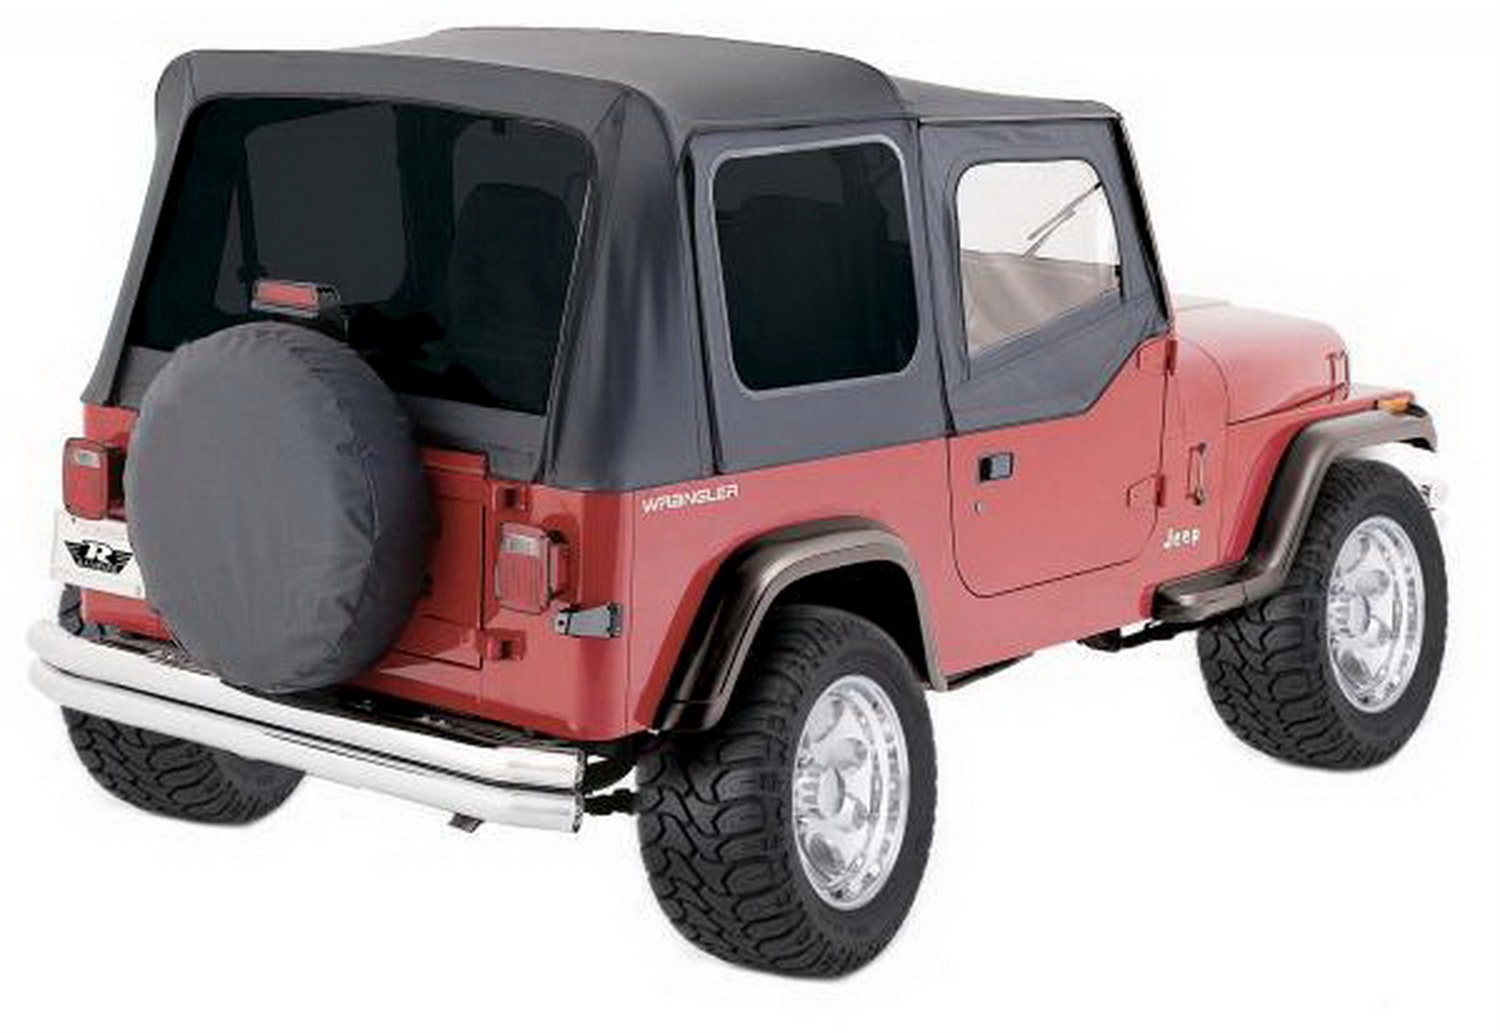 Rampage Rampage 68115 Complete Soft Top Kit Fits 87-95 Wrangler (YJ)